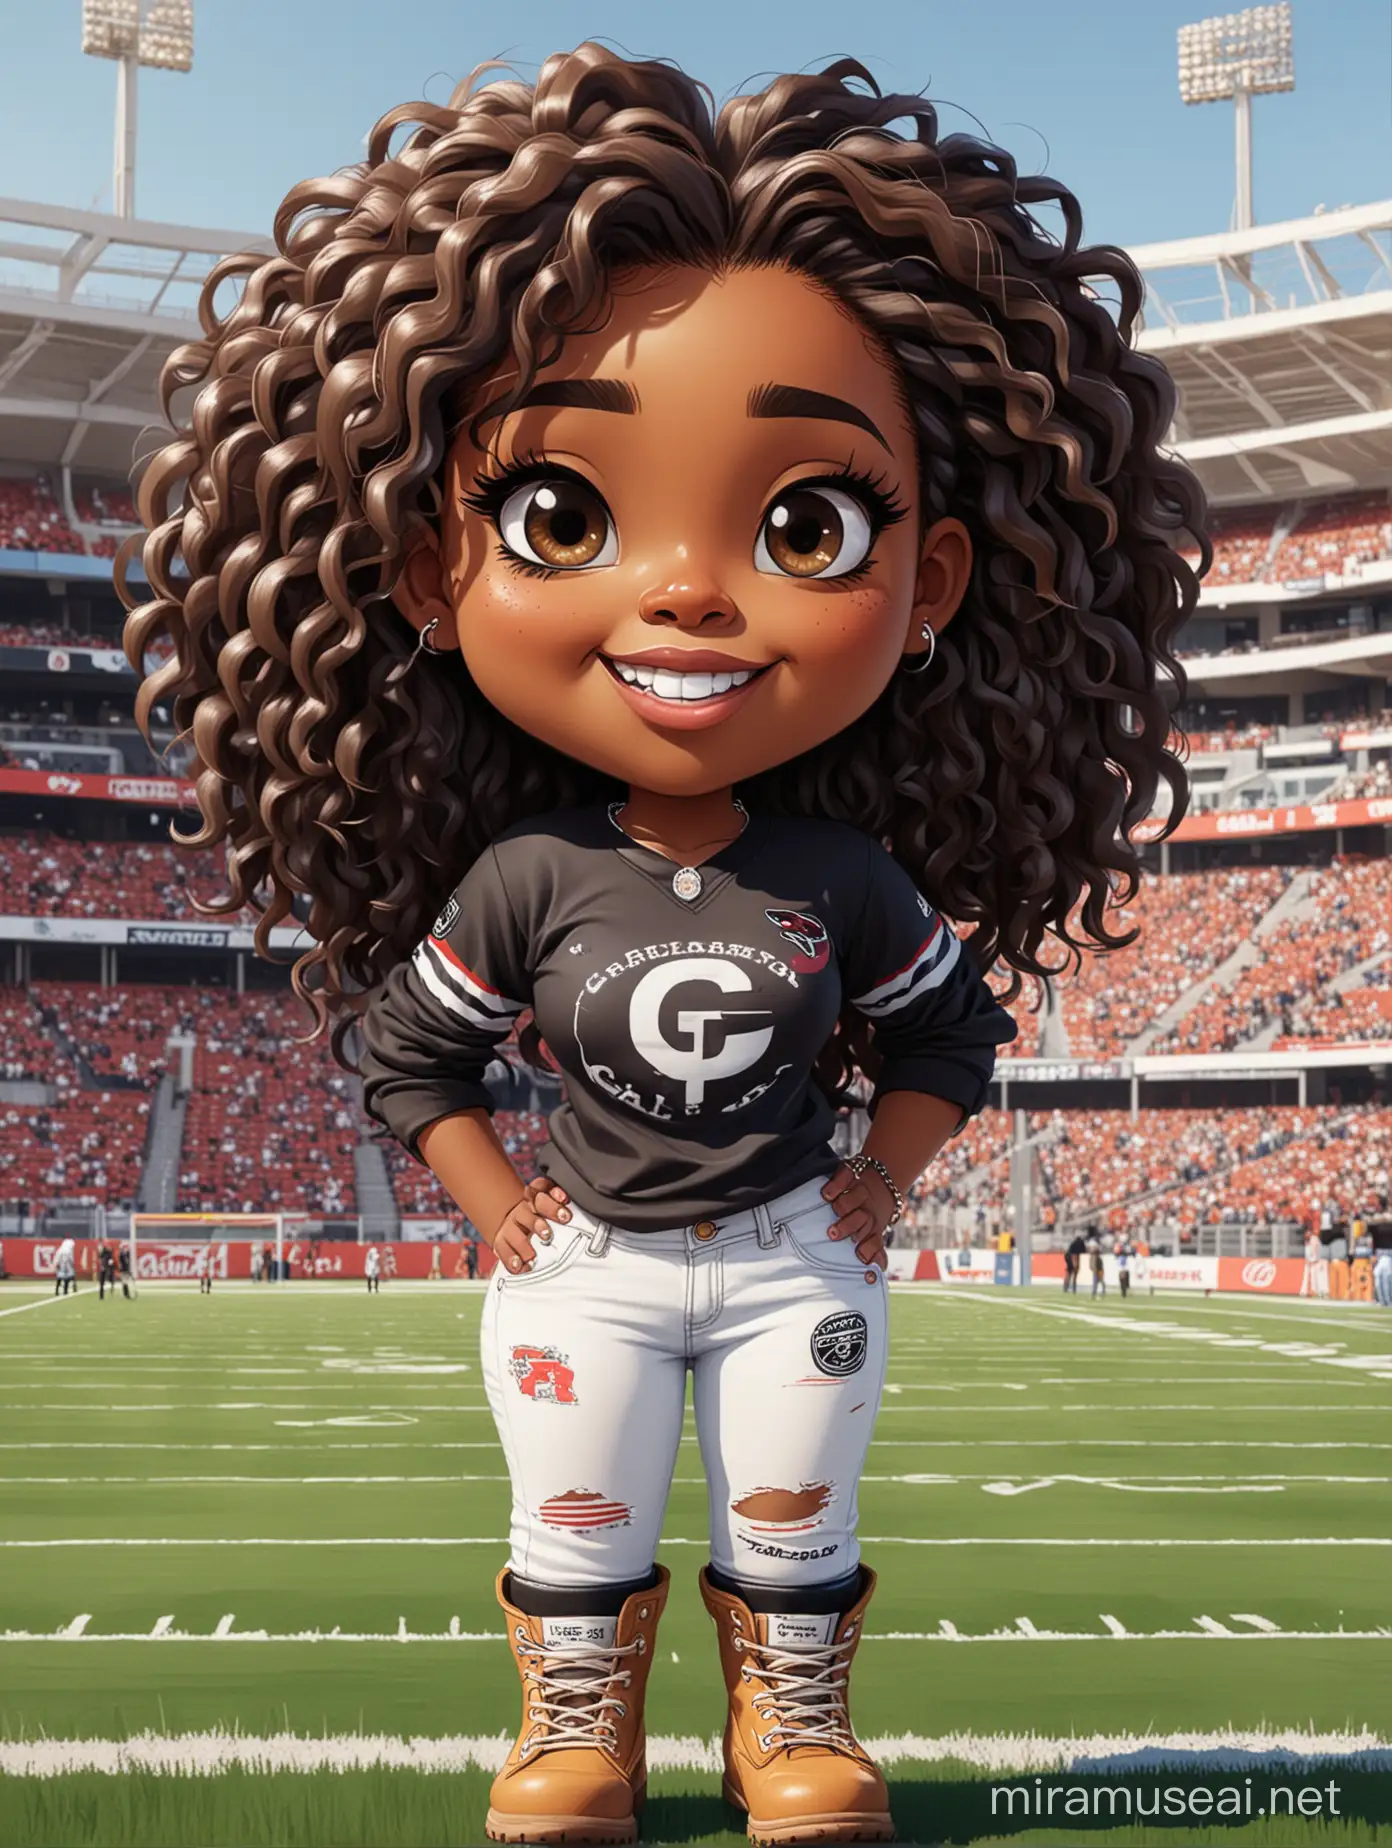 A sassy thick-lined abstract art style cartoon image of a black chibi girl standing in front of a football stadium. She is wearing a Georgia Bulldogs football jersey with tight white jeans and timberland boots. behind her curvy body. Looking up coyly, she grins widely, showing sharp teeth. Her poofy hair forms a mane framing her confident, regal expression. Prominent makeup with hazel eyes. Hair is highly detailed.